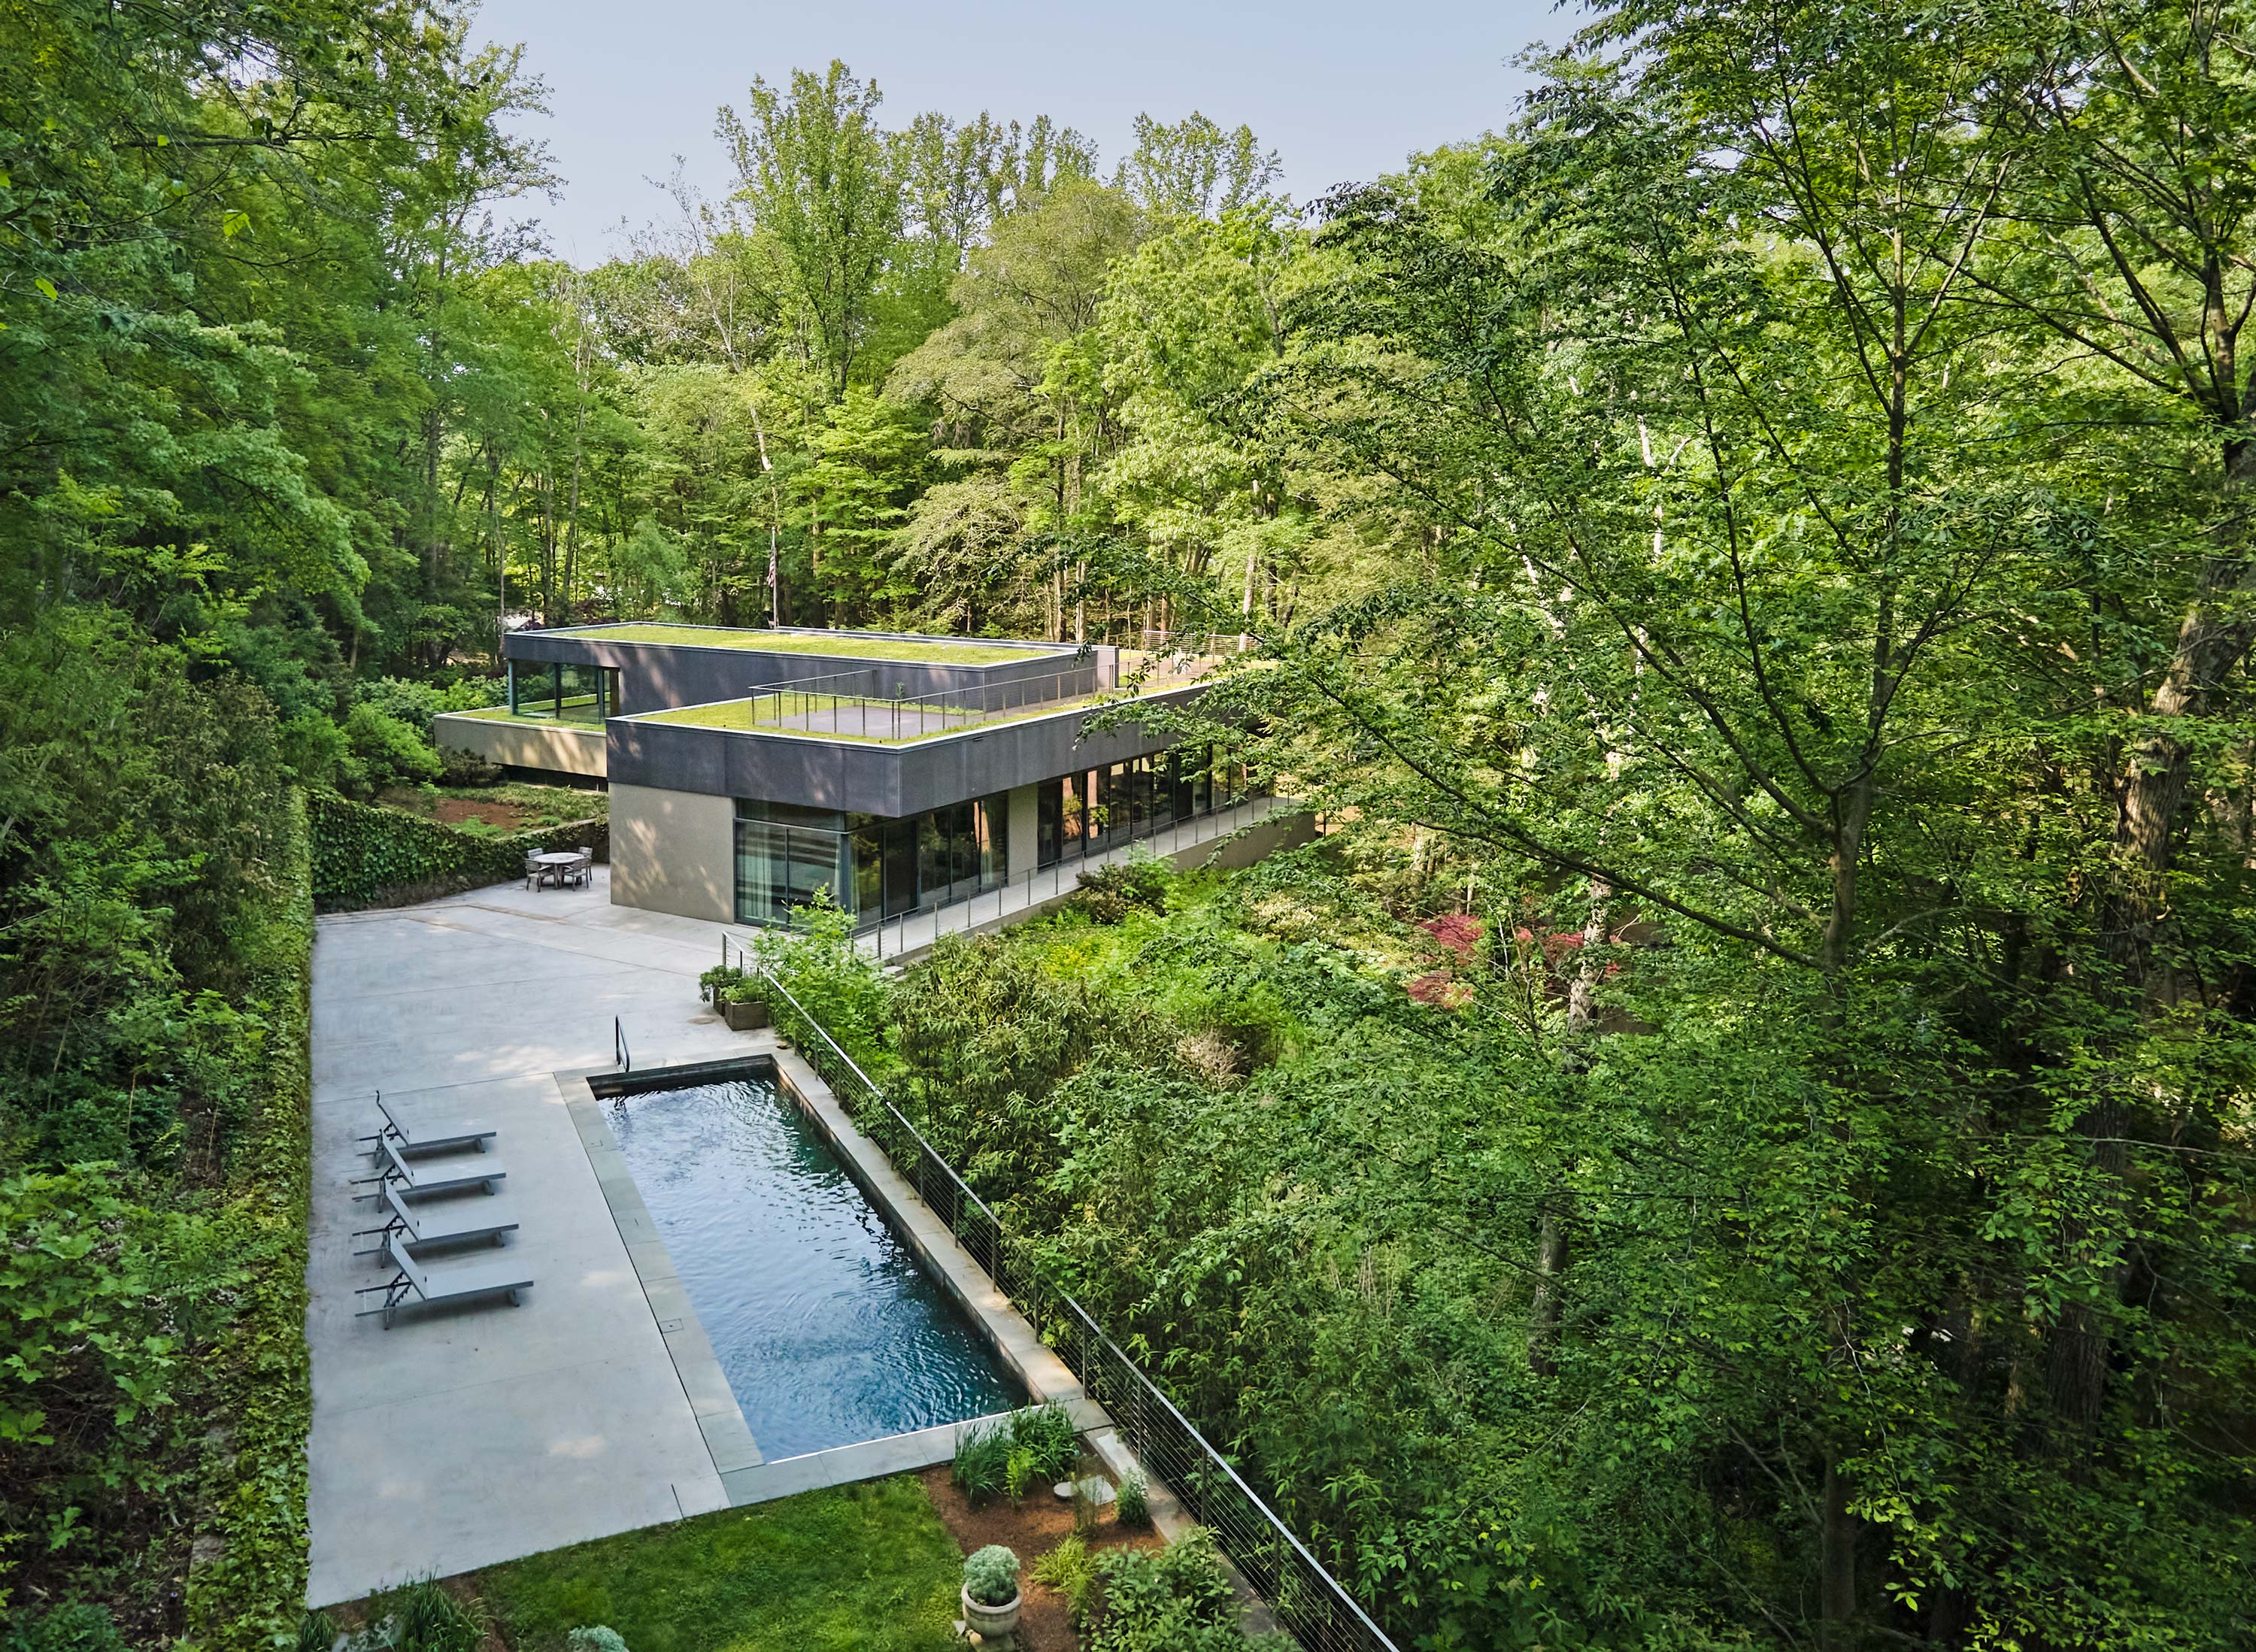 Exterior photo of Weston Residence by Specht Novak Architects. Shot by Jasper Lazor, featuring the concrete and glass house with roof gardens, and outside pool with lounging area.